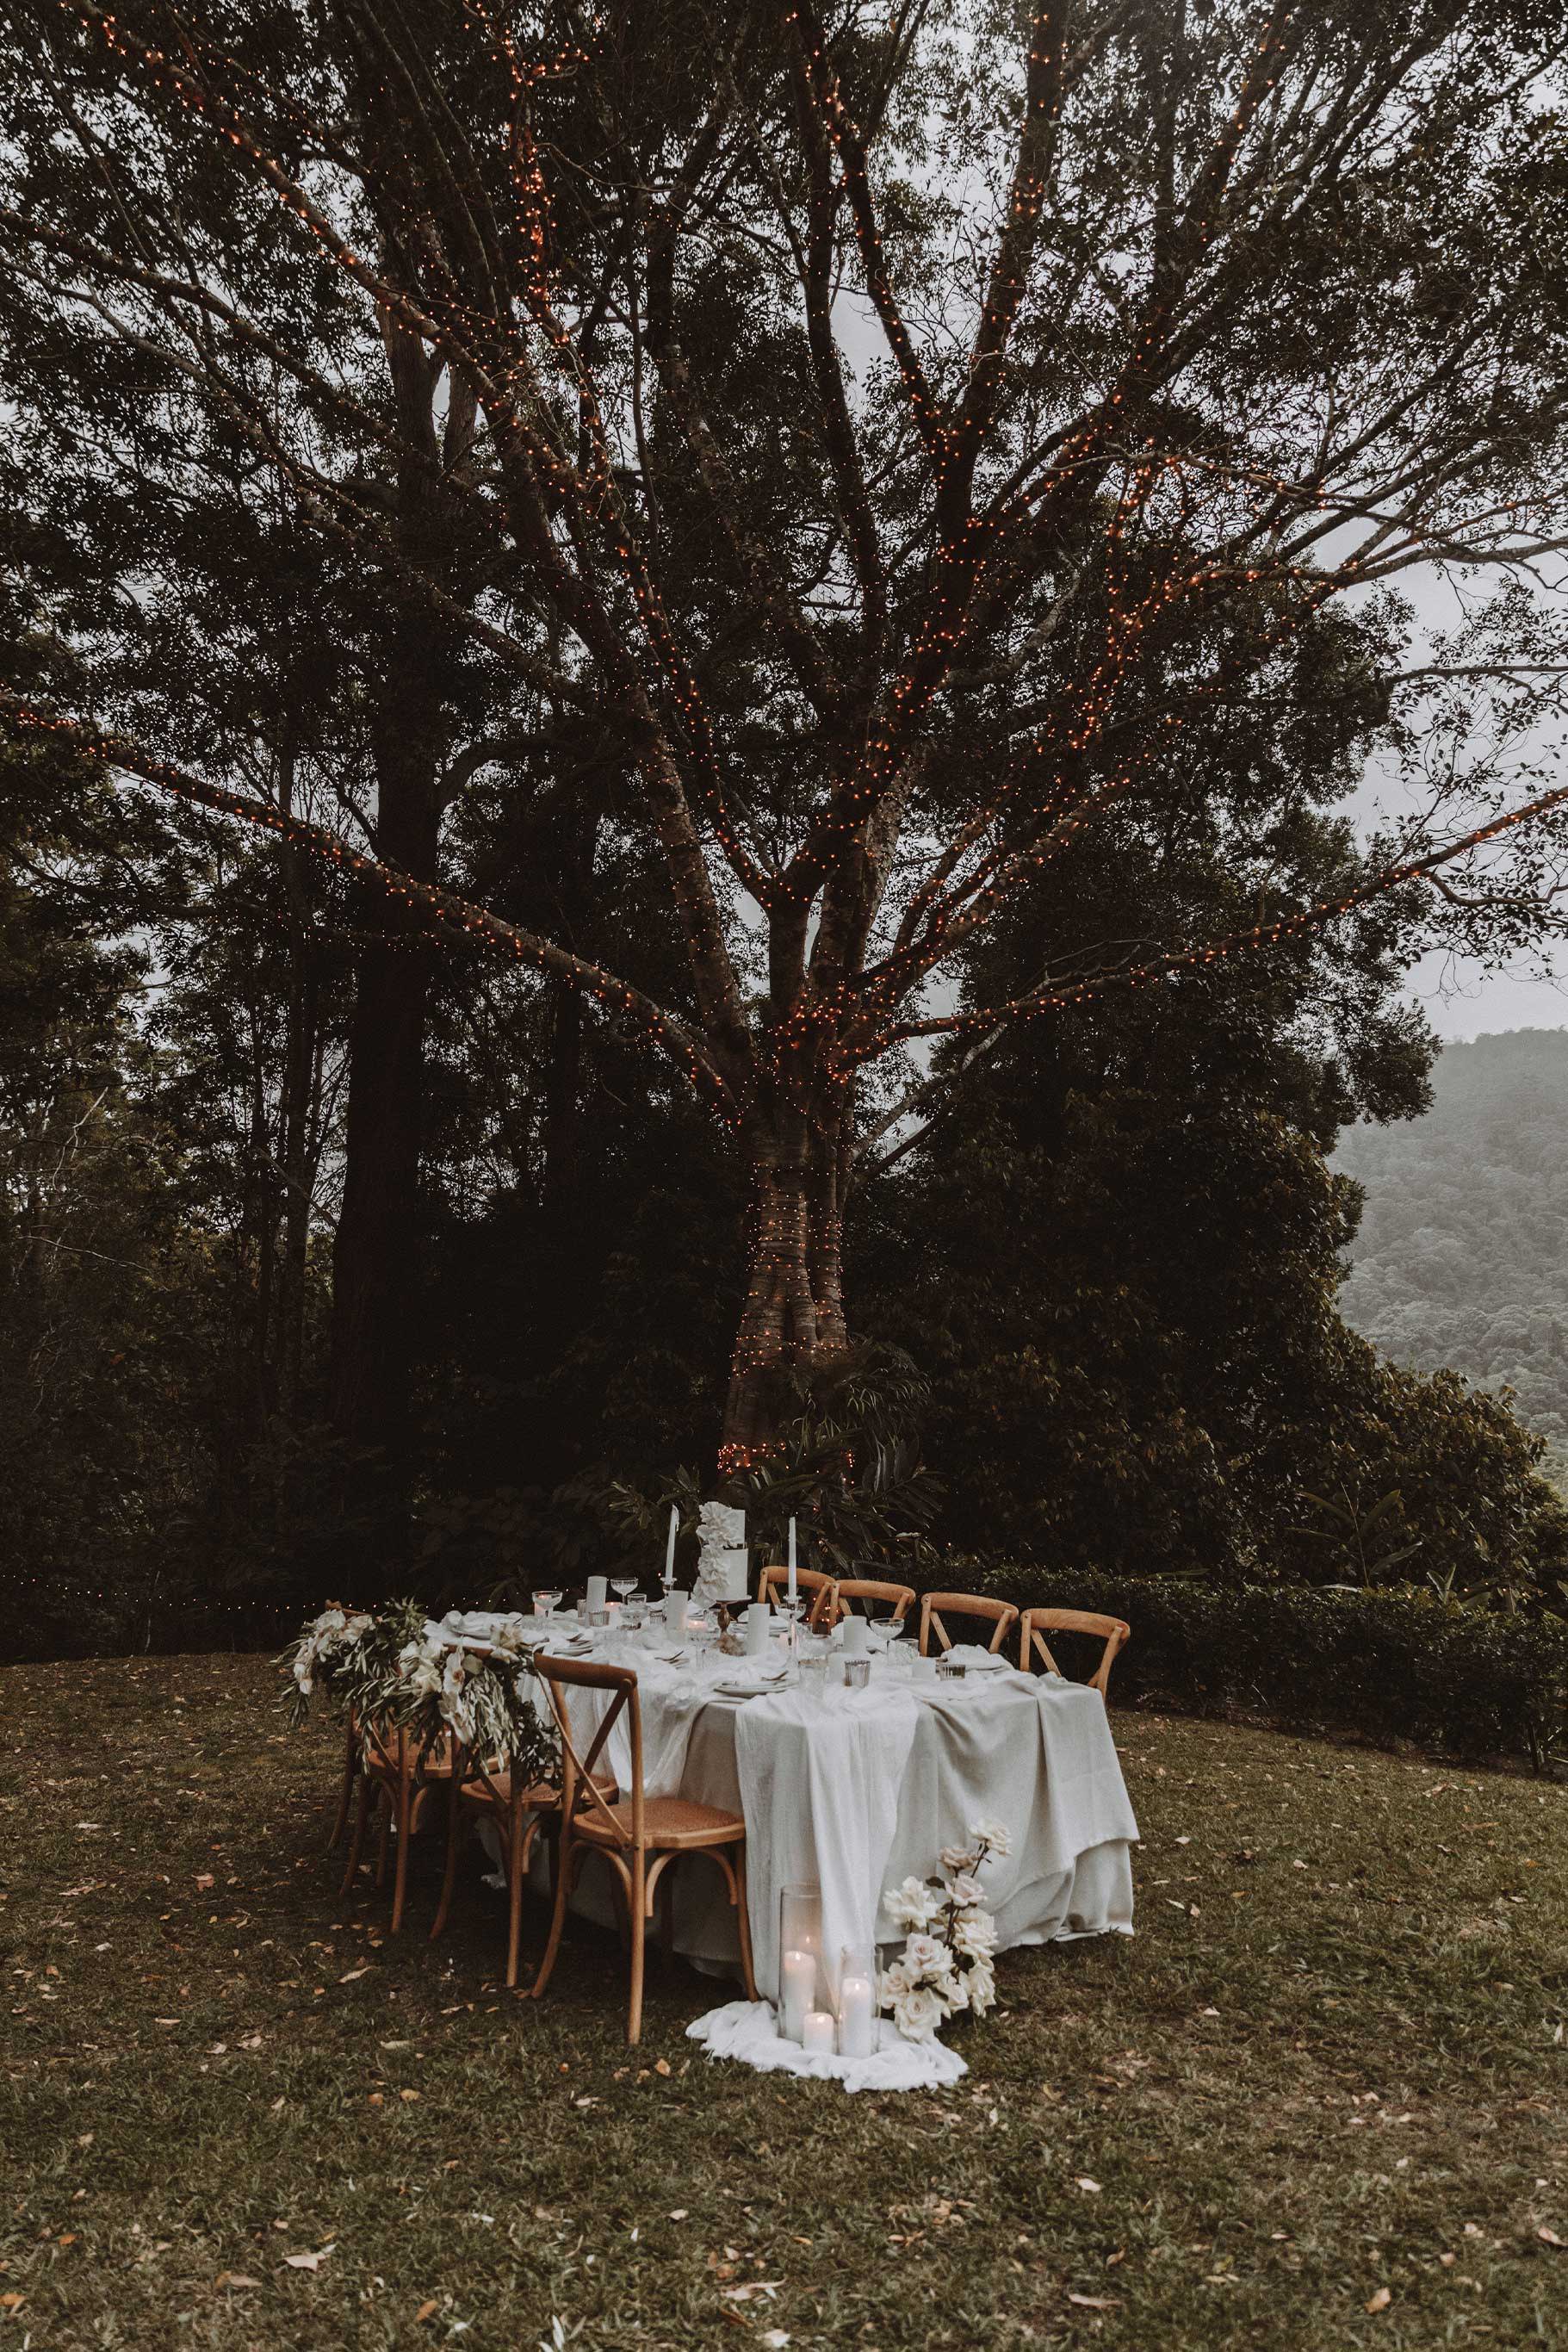 Wedding table layout amongst forest trees on a hill. Fairy lights on the trees